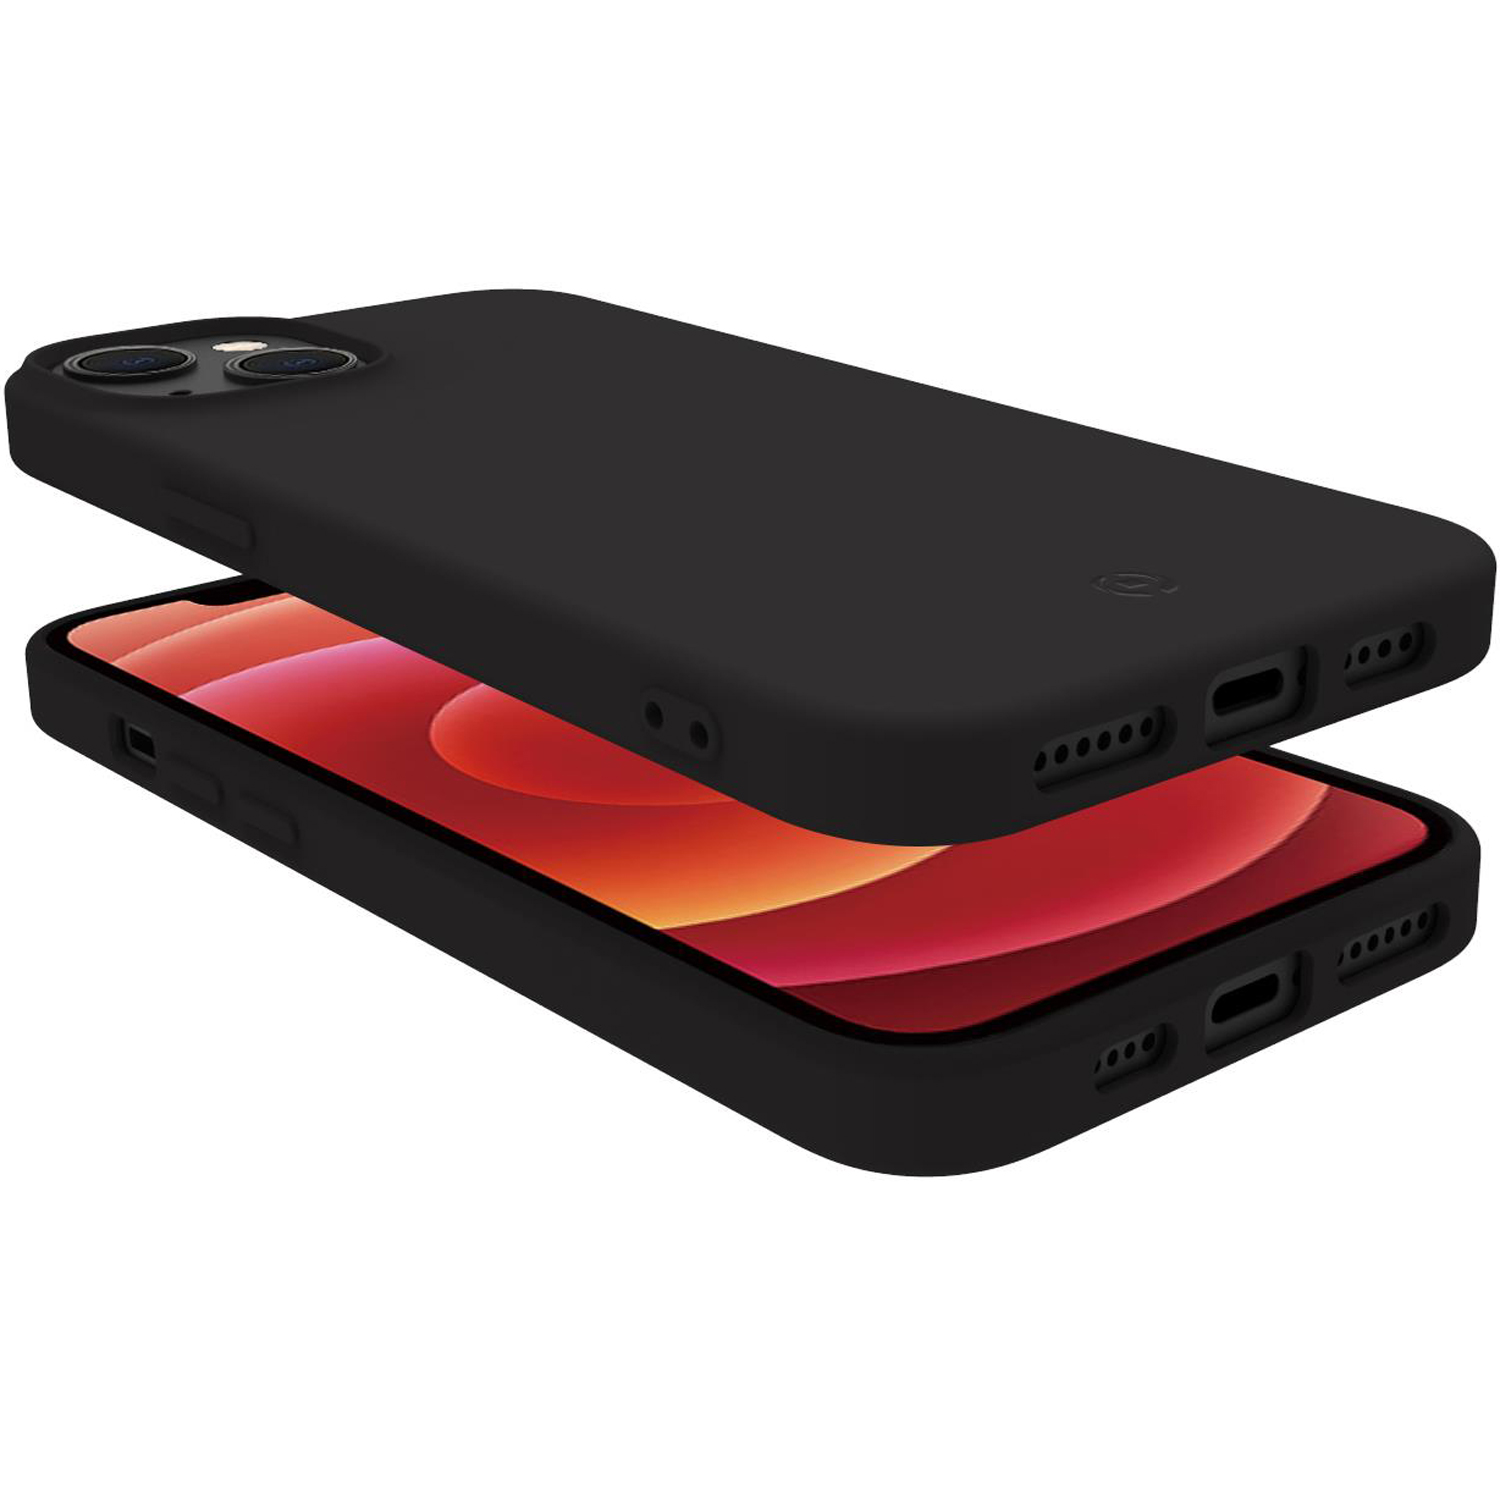 CELLY Planet Soft TPU-Cover GRS iPhone Schwarz Backcover, 14 14 iPhone Antwort, Plus Plus, Apple